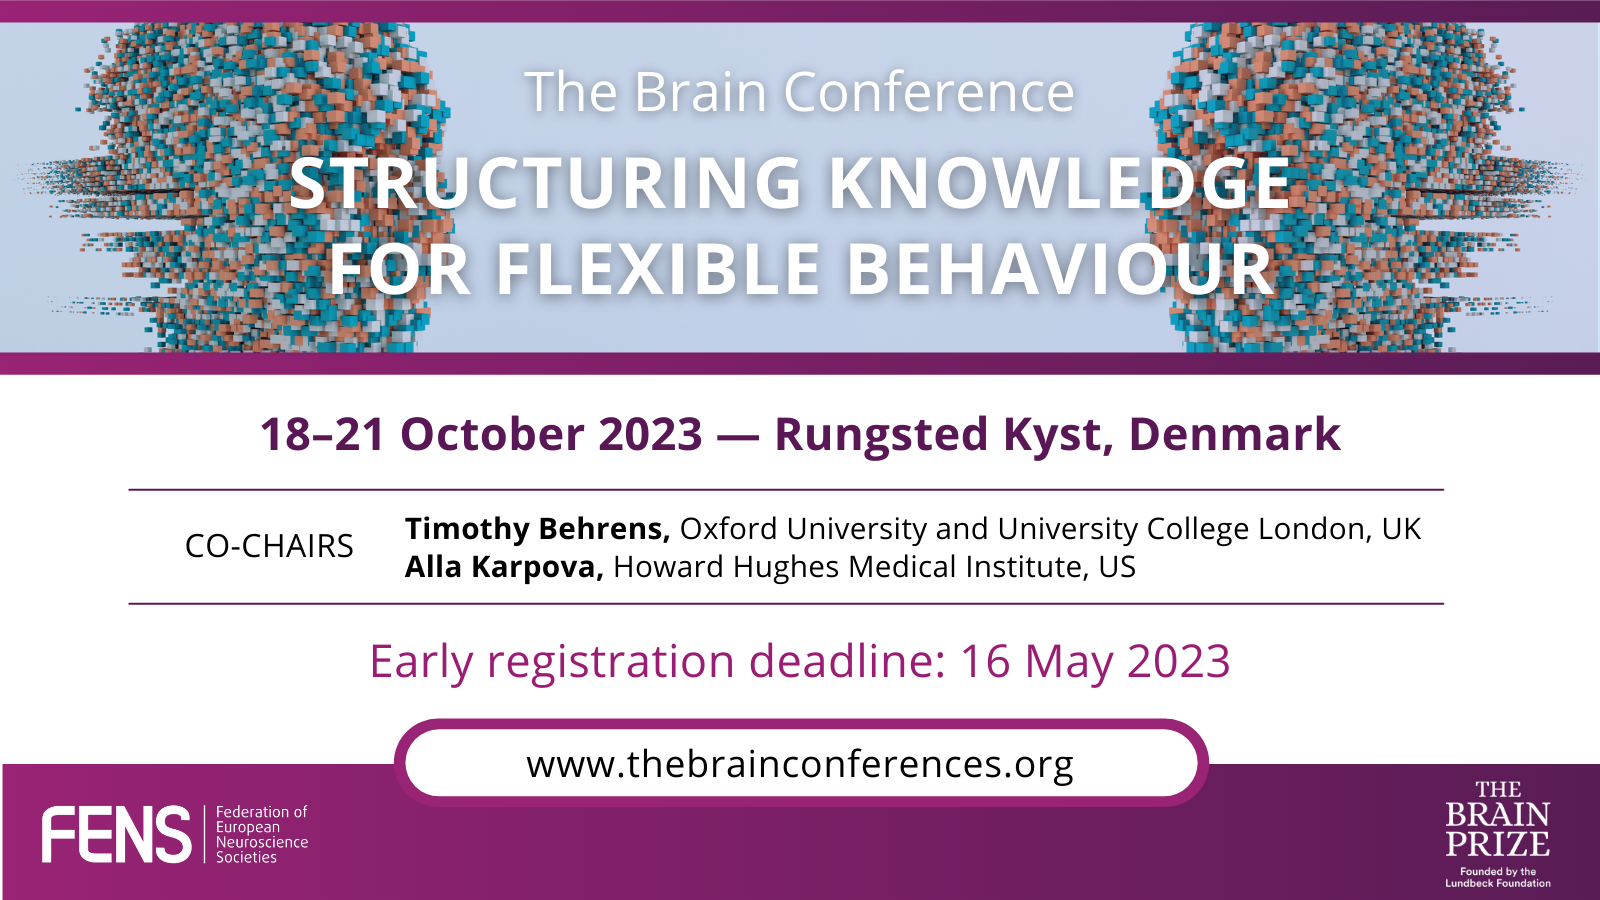 Discover the Brain Conference “Structuring Knowledge for Flexible